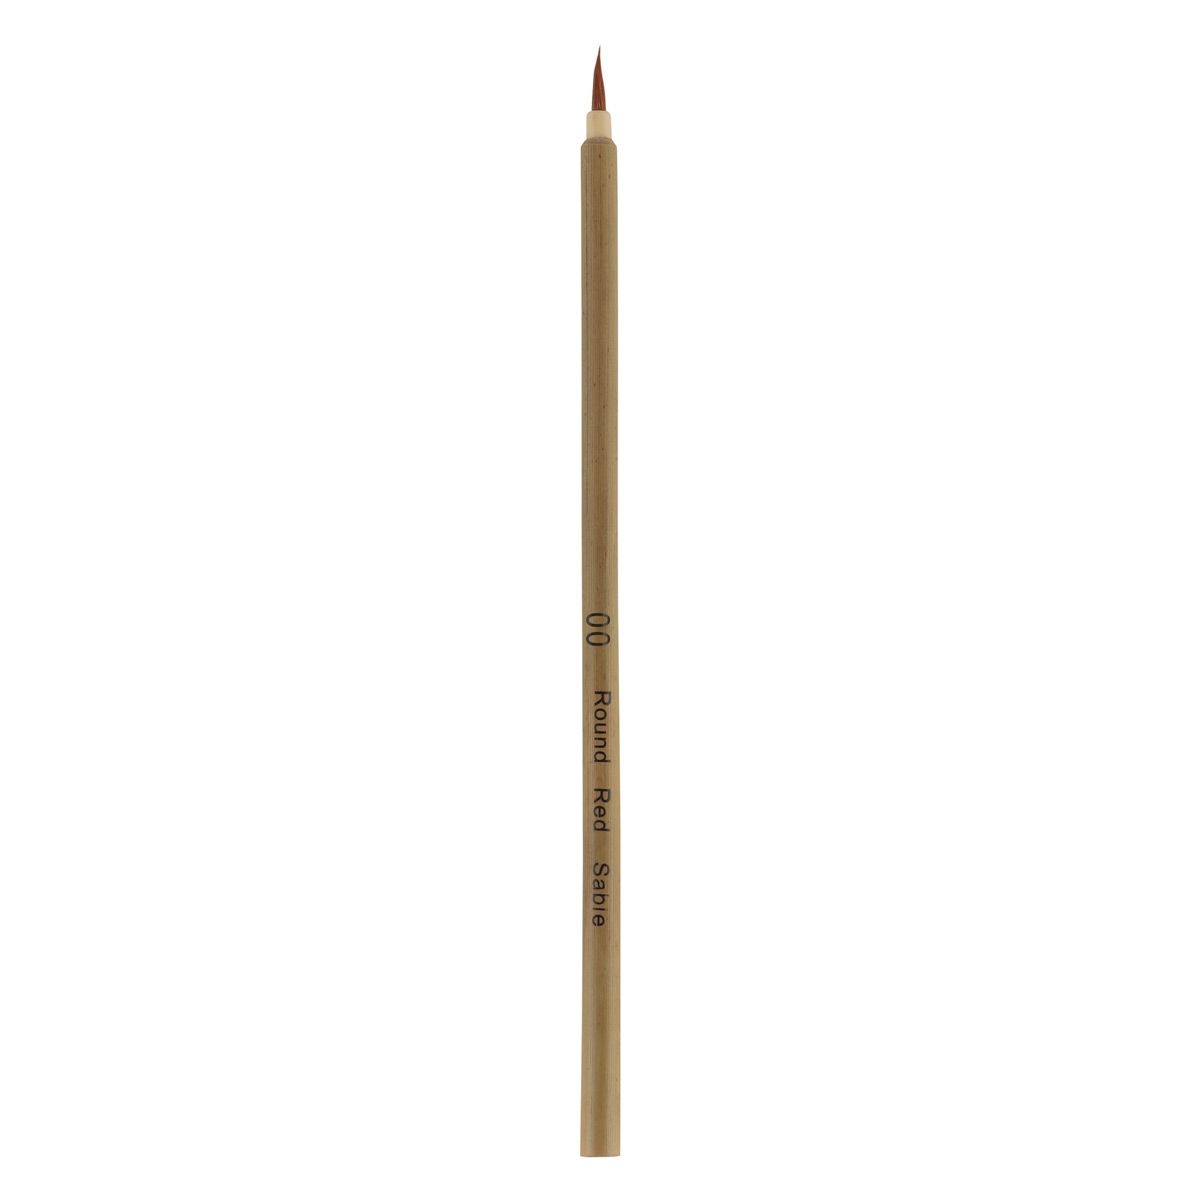 Lian Zhens Recommended Brush - Round #00